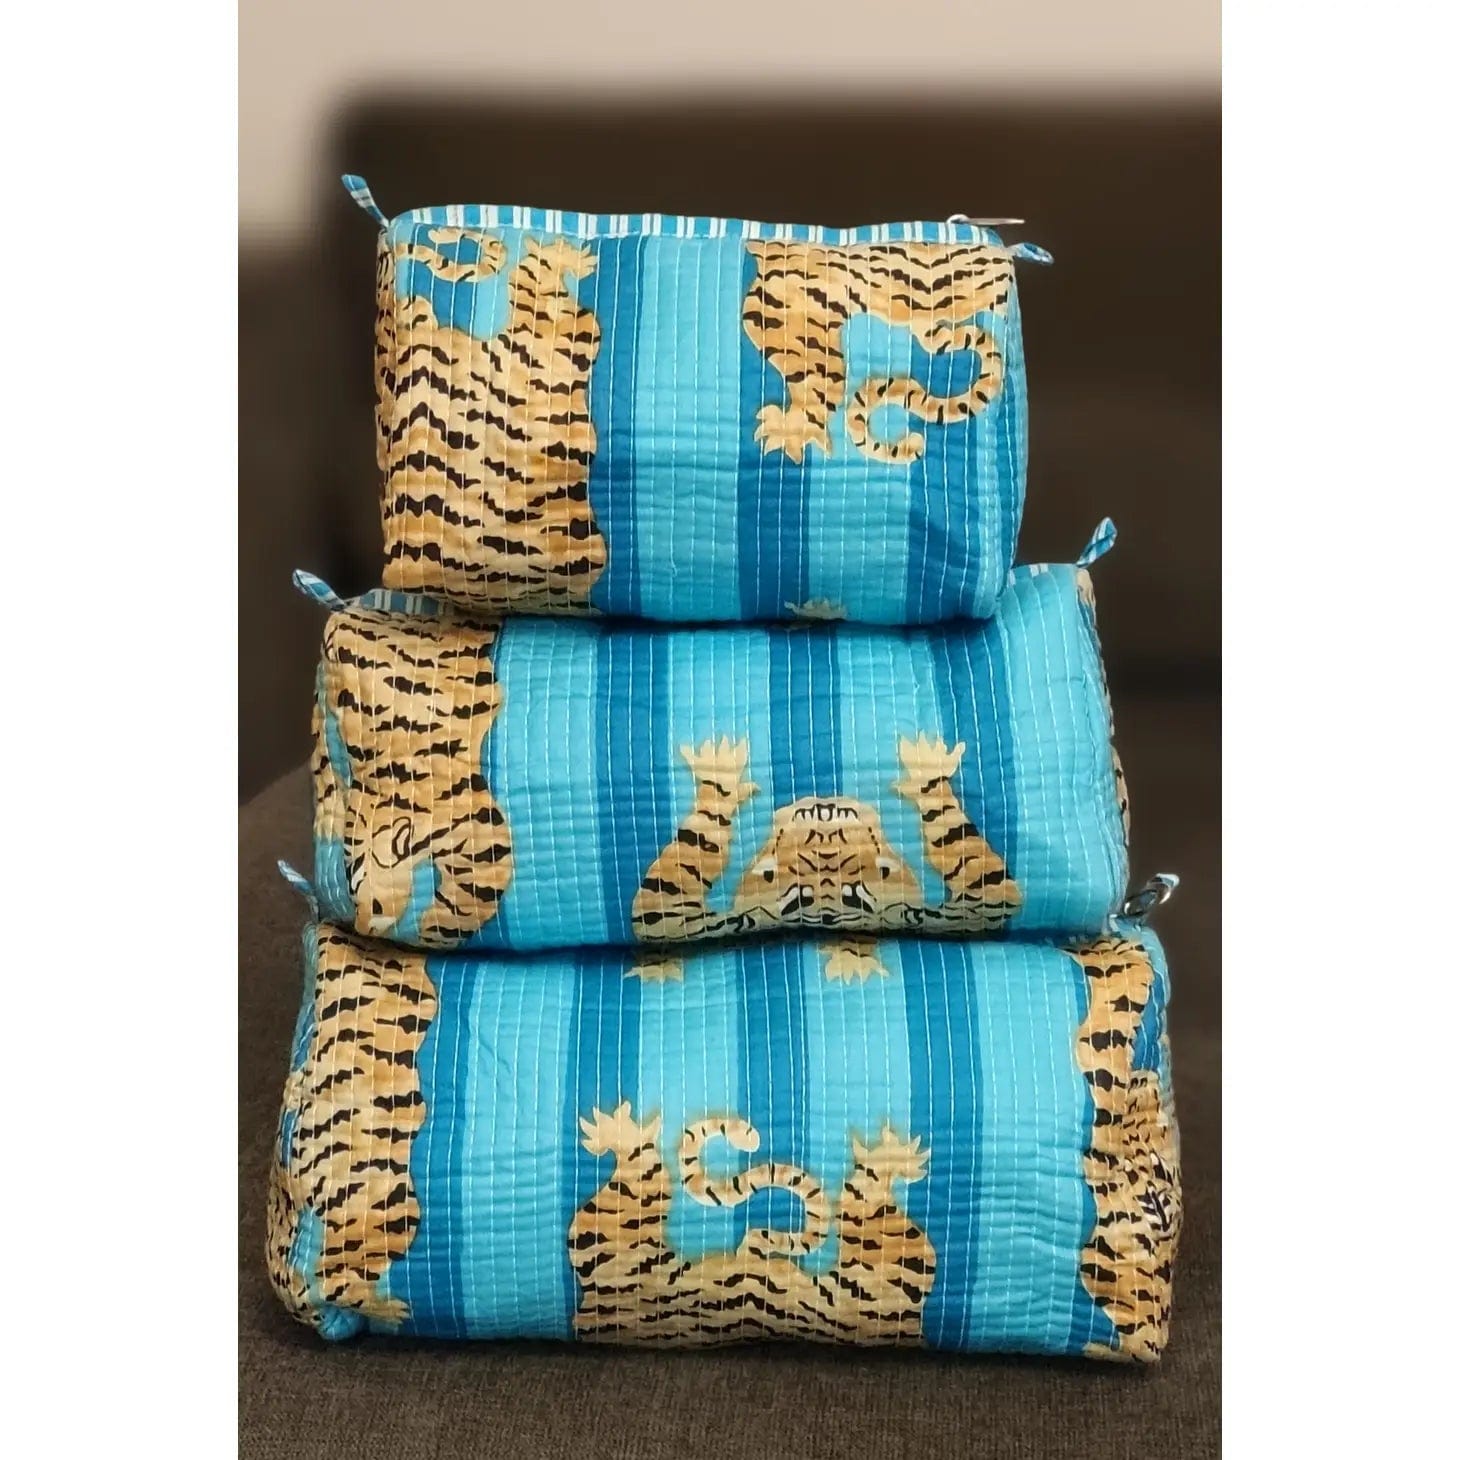 Cotton Quilted Block Printed Toiletry Bags Set, Wash Bags Set of 2